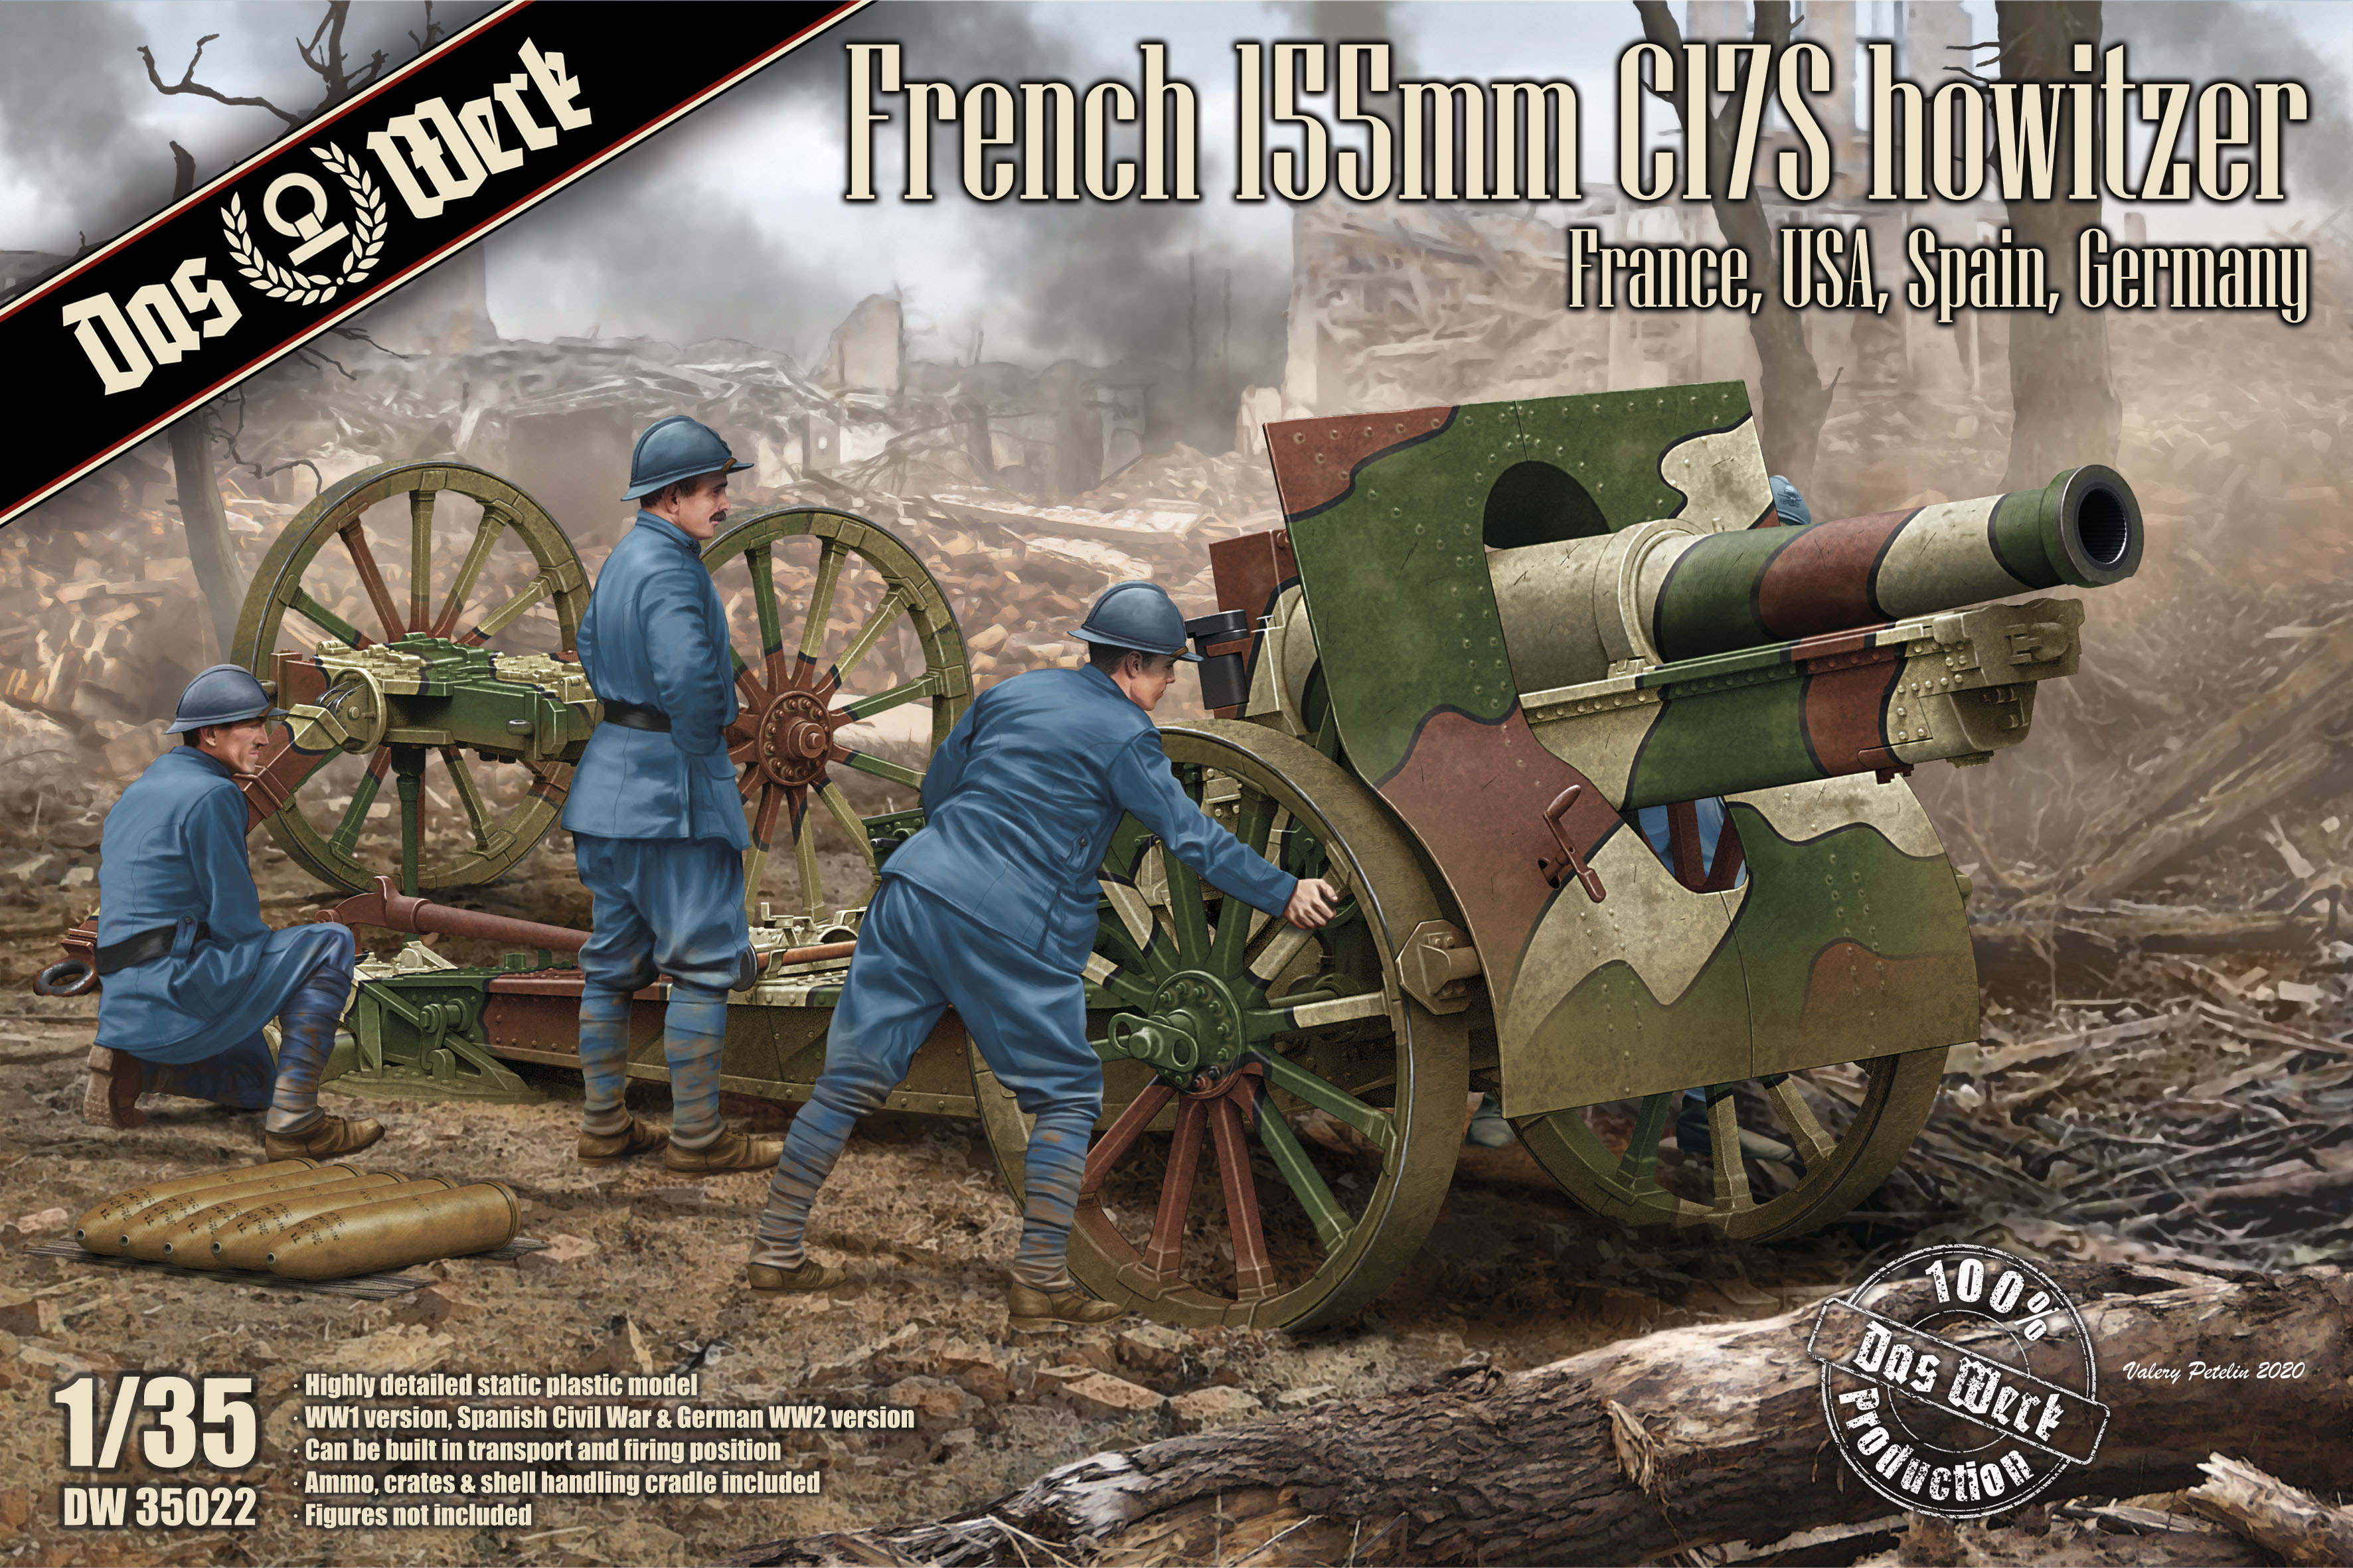 DW35022 French 155mm C17S Howitzer